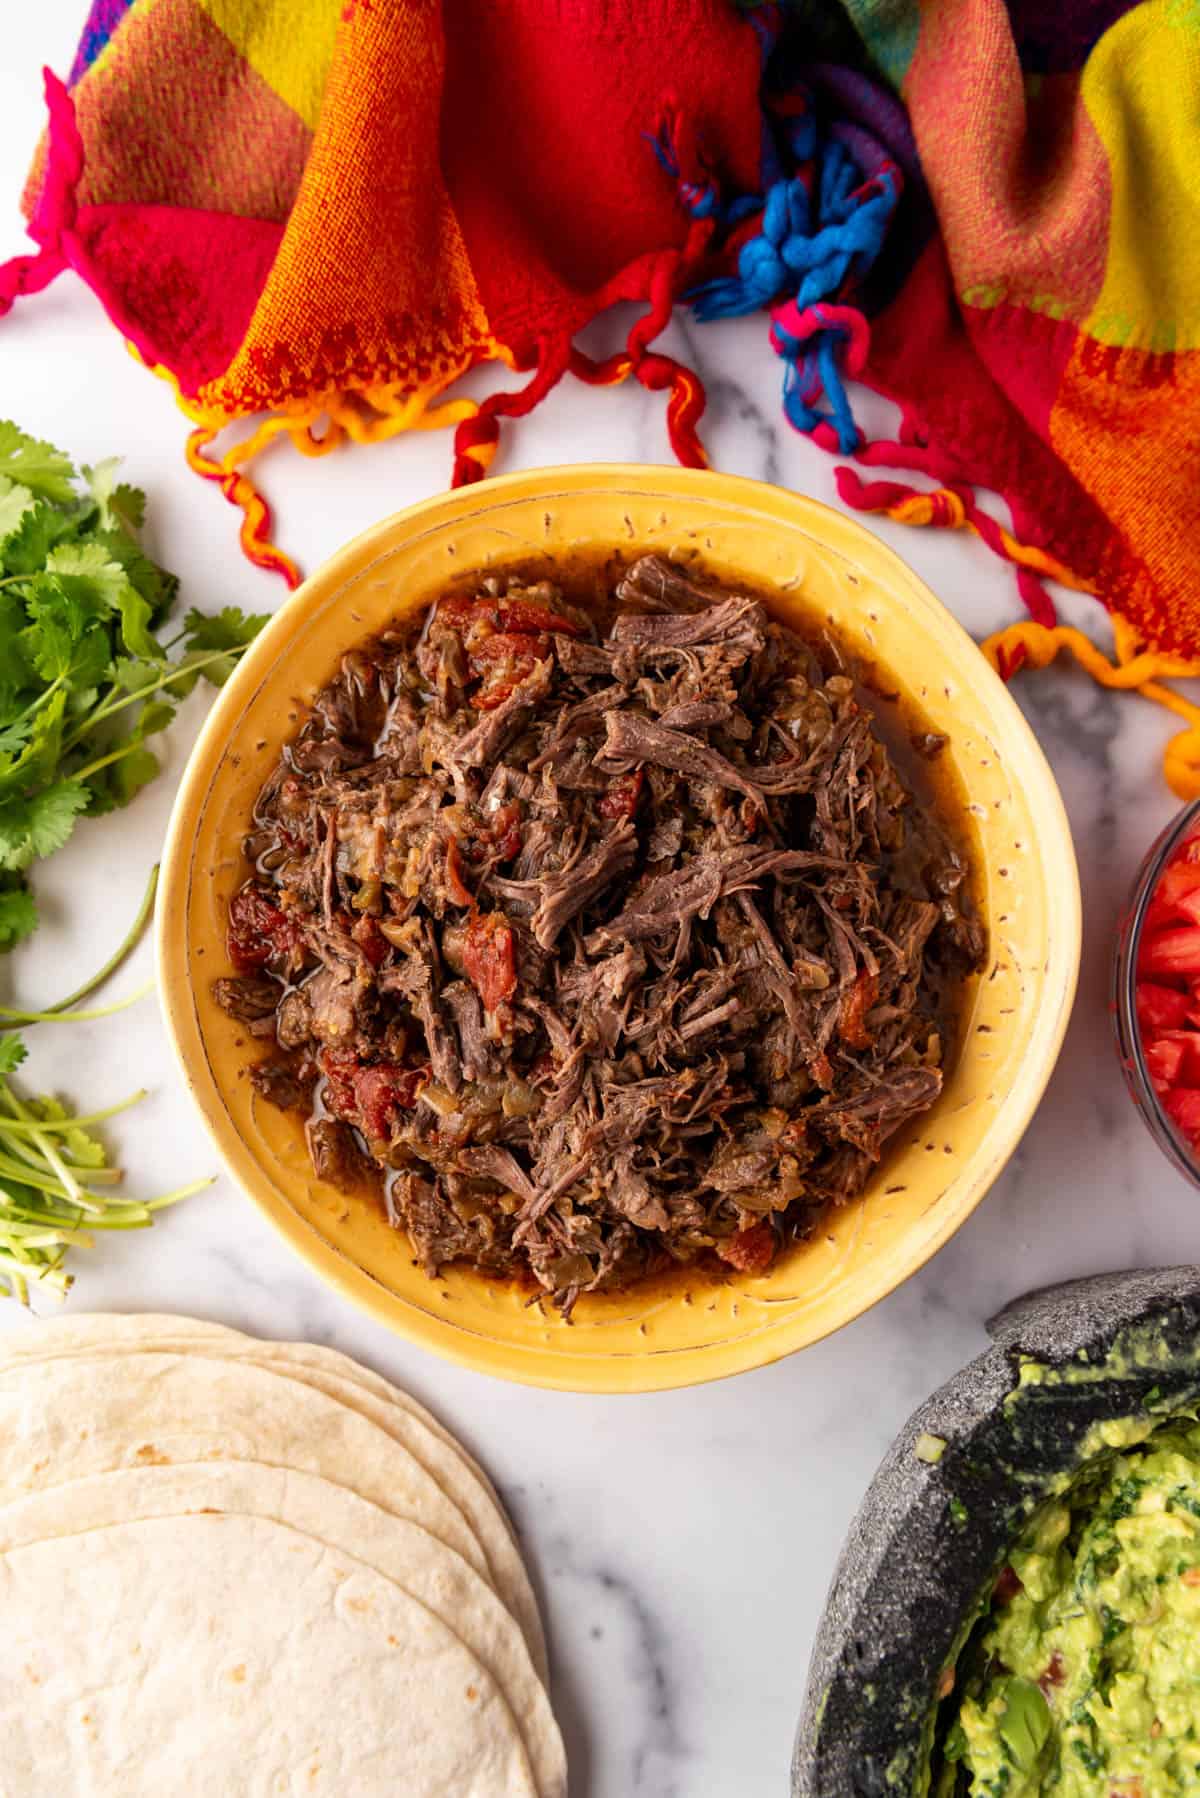 An image of a bowl of Mexican shredded beef surrounded by tortillas, cilantro, and guacamole.